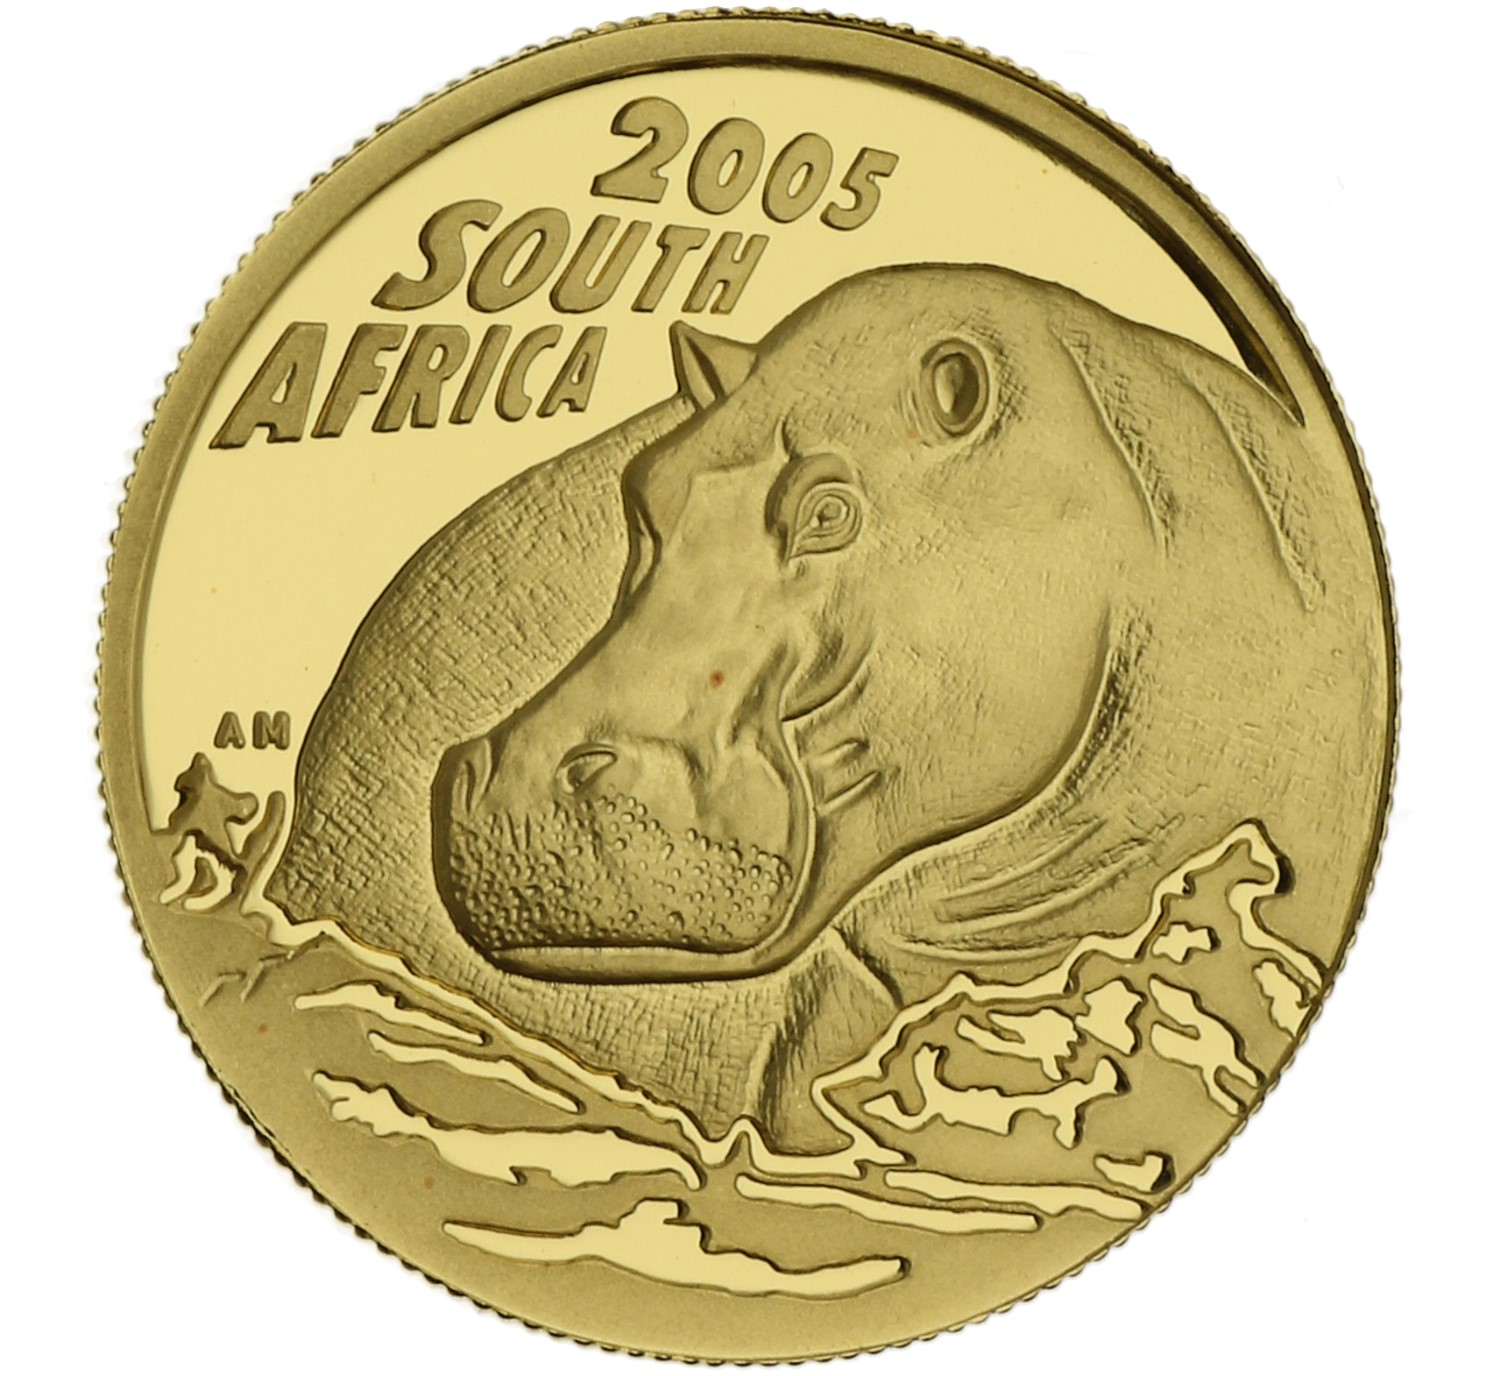 20 Rand - South Africa - 2005